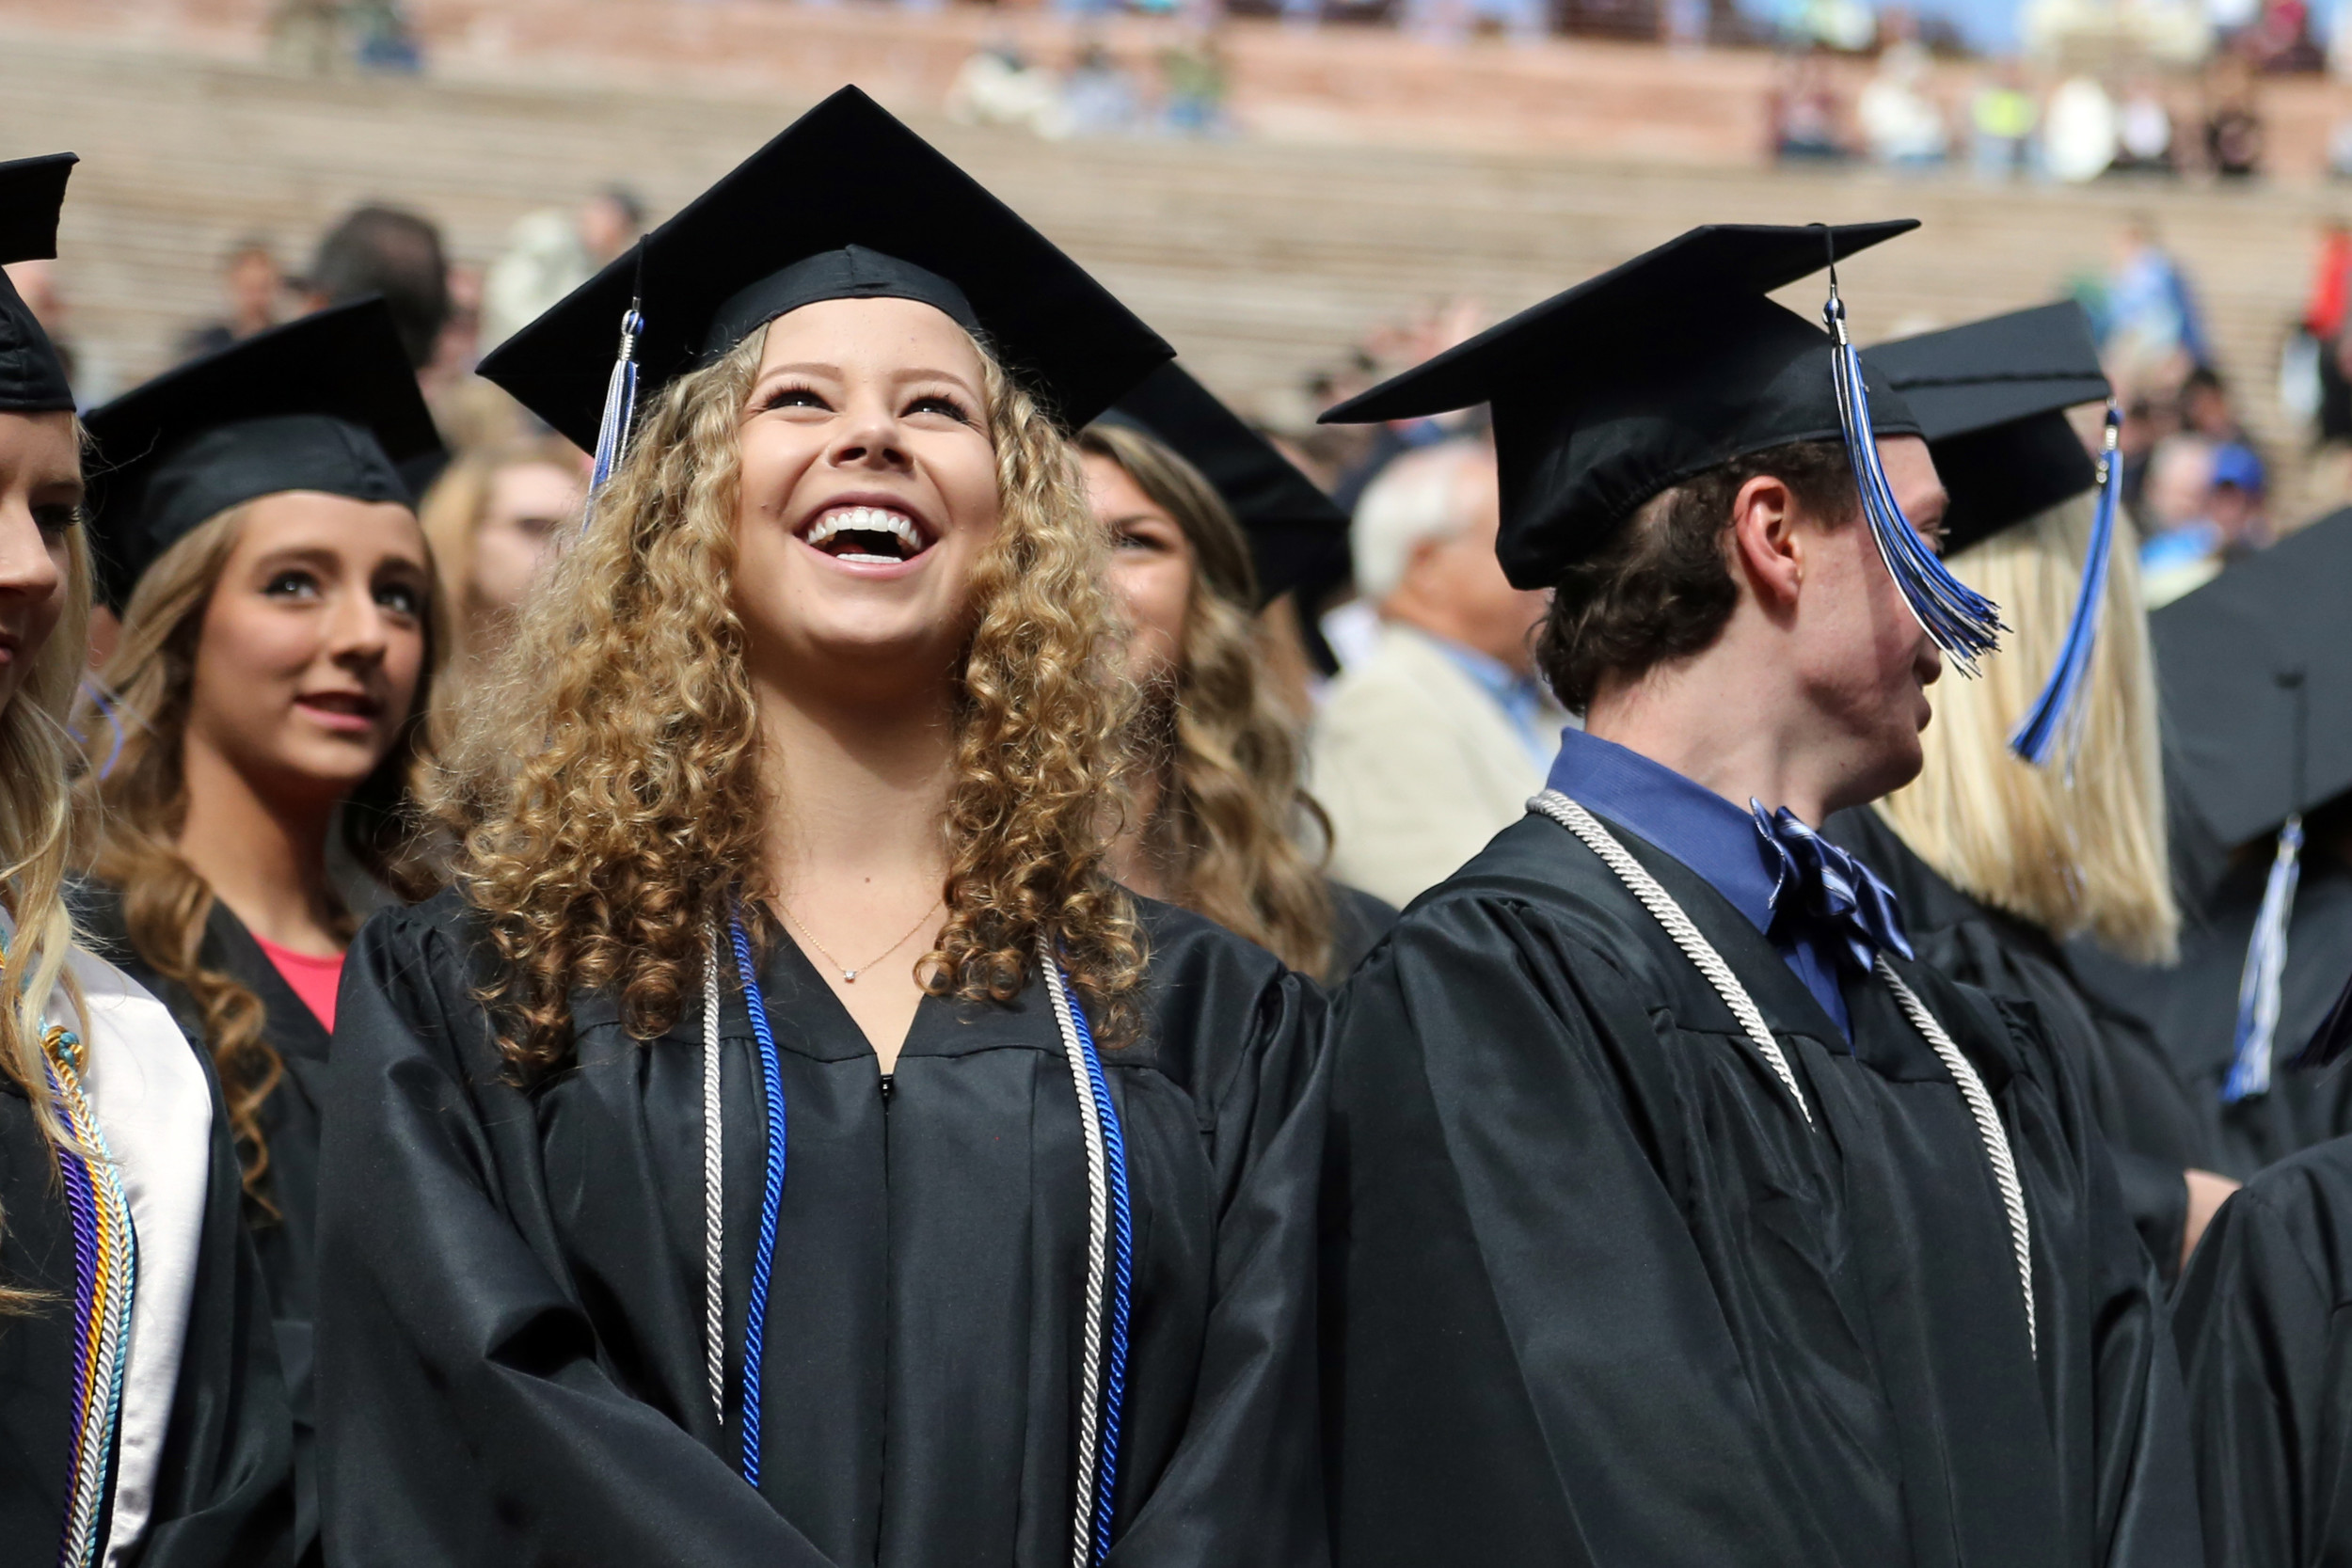 Highlands Ranch High School graduation Falcons poised to fly